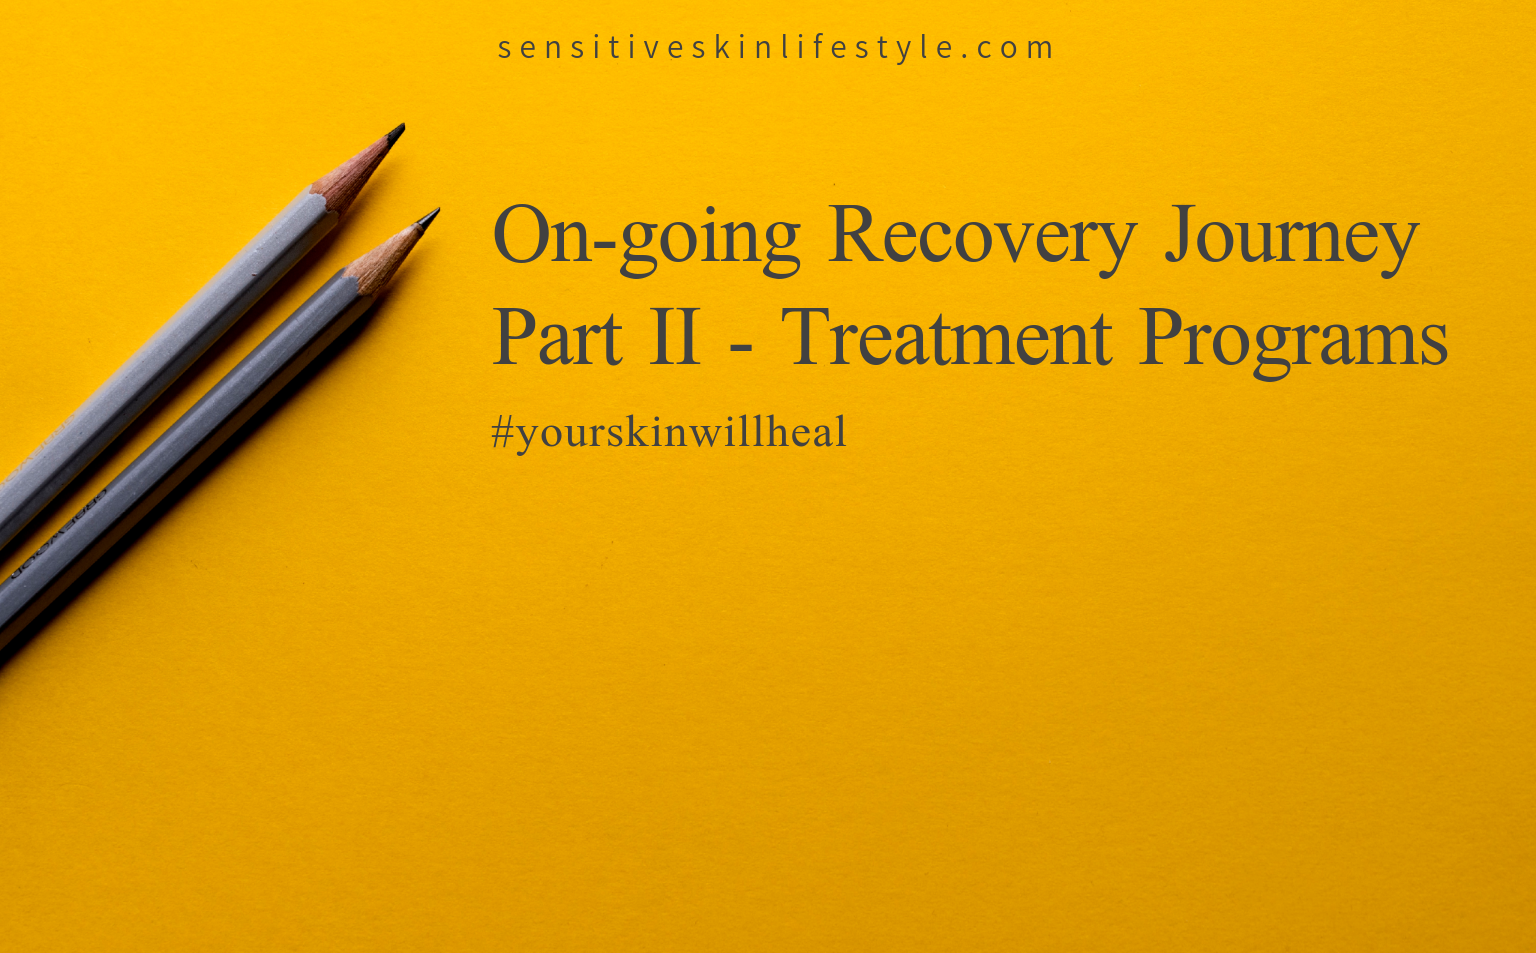 On-going Recovery Journey Part II - Treatment Options